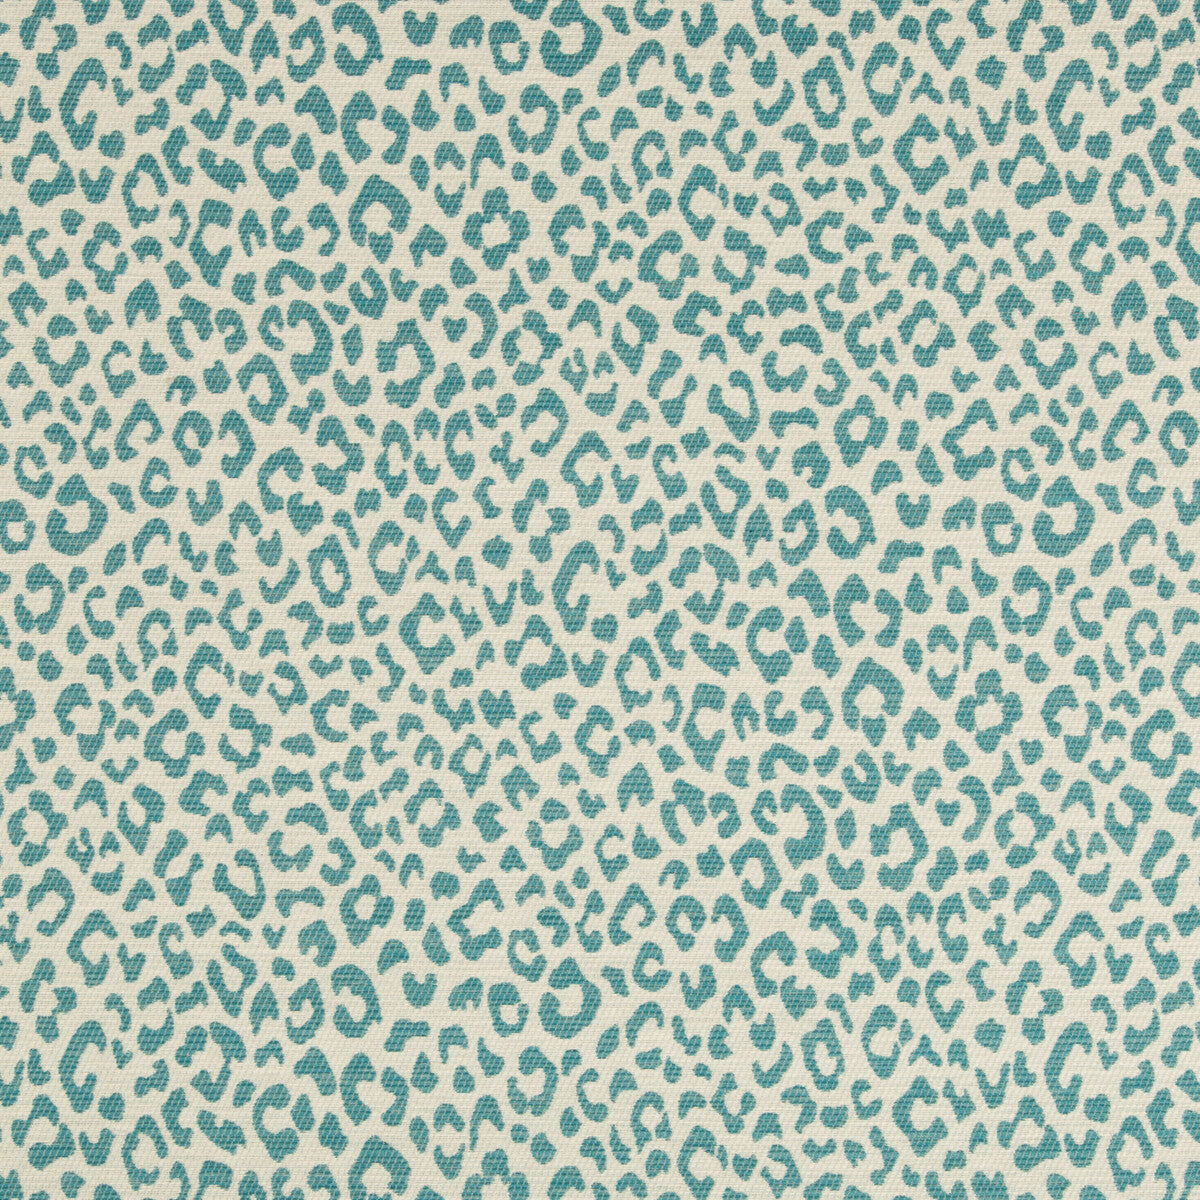 Kravet Design fabric in 34686-35 color - pattern 34686.35.0 - by Kravet Design in the Performance Crypton Home collection